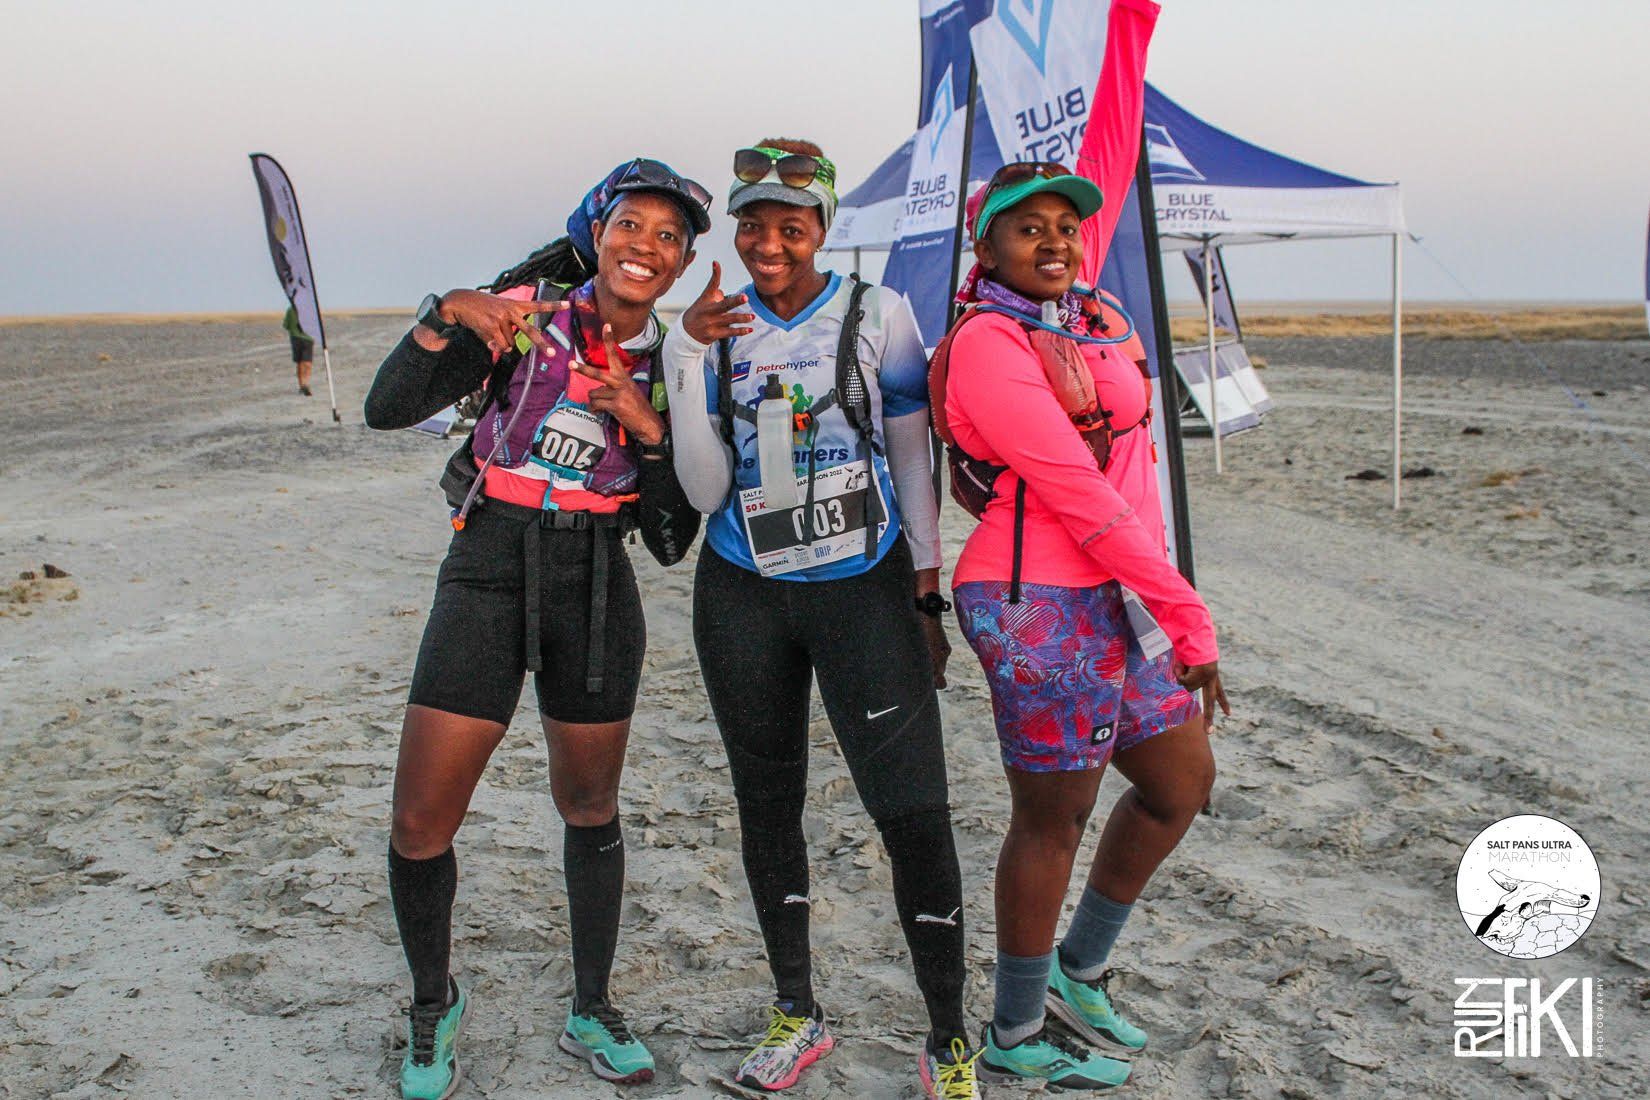 Every year runners from across the globe tackle this bucket-list race.